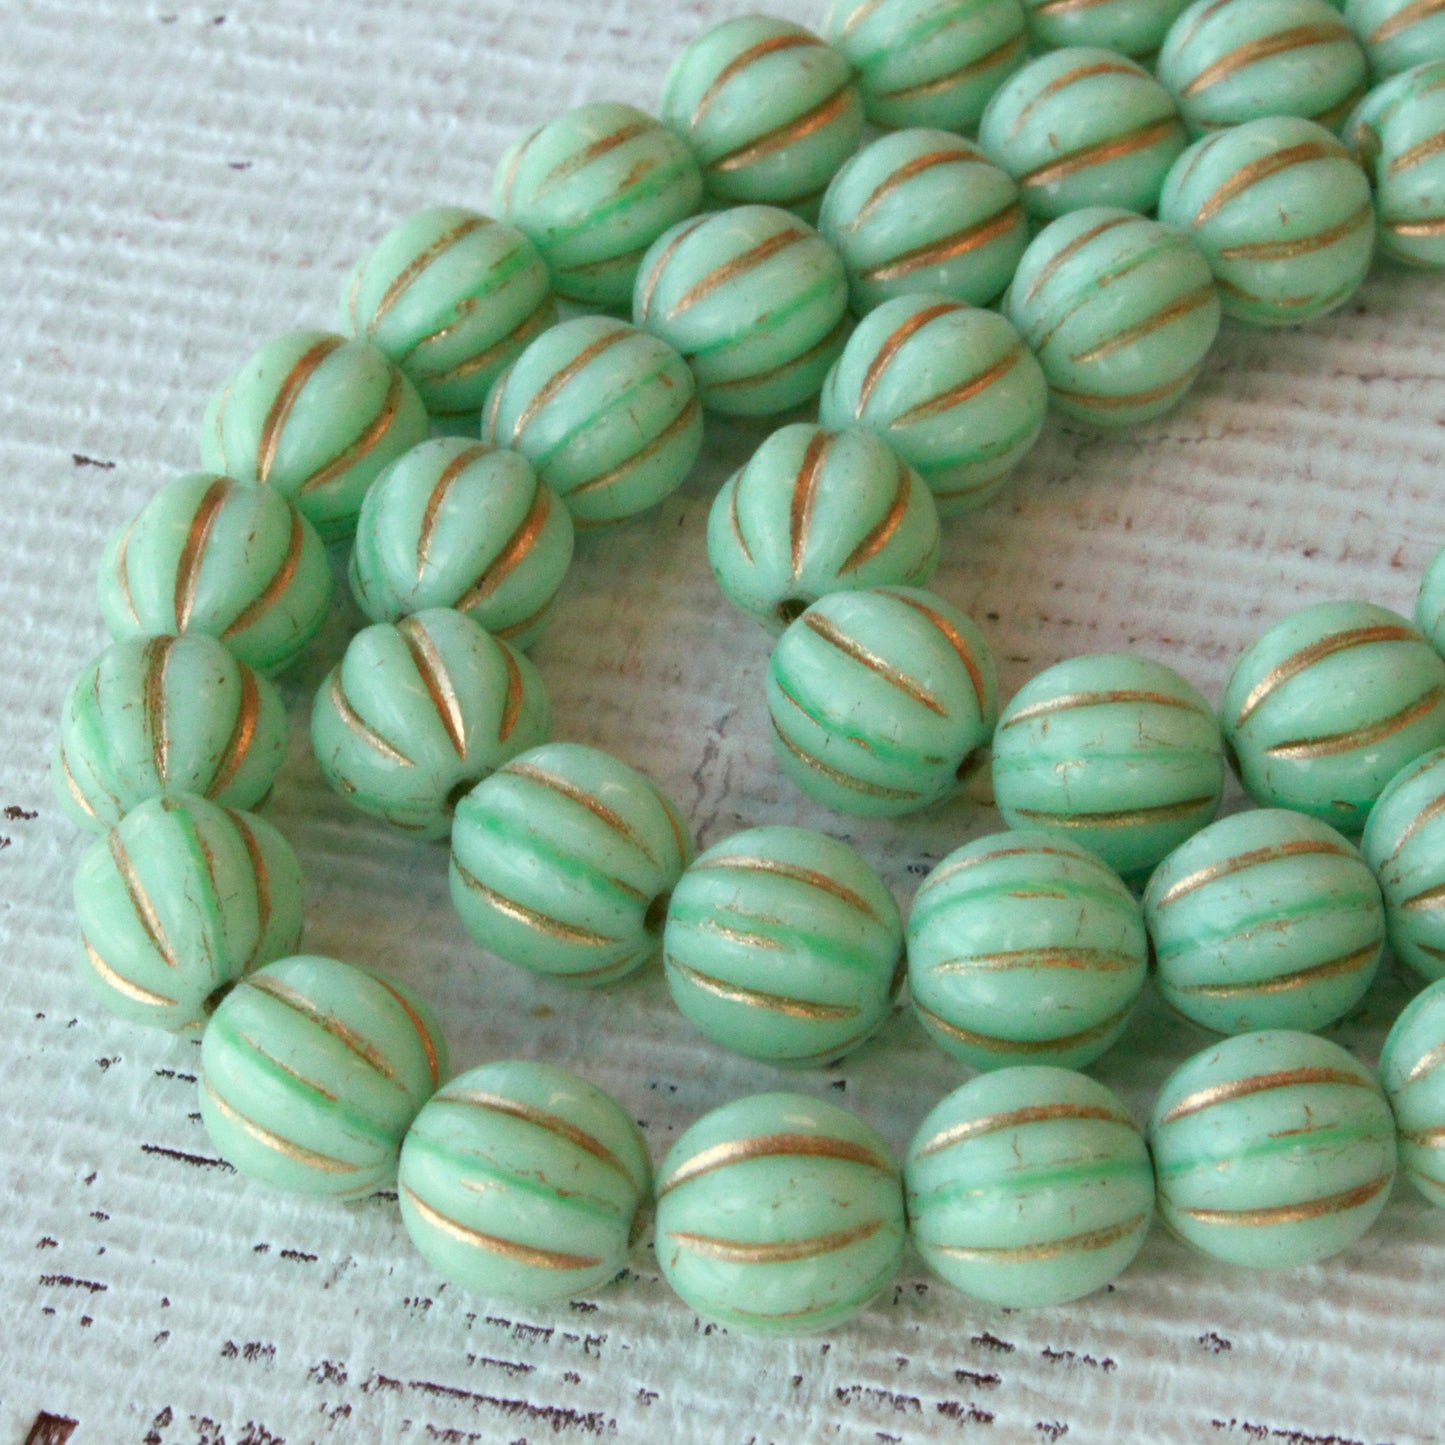 10mm Melon Beads for Jewelry Making Czech Glass Melon 10mm Round Beads  Czech Glass Beads Fluted Beads Pink With Gold Wash 